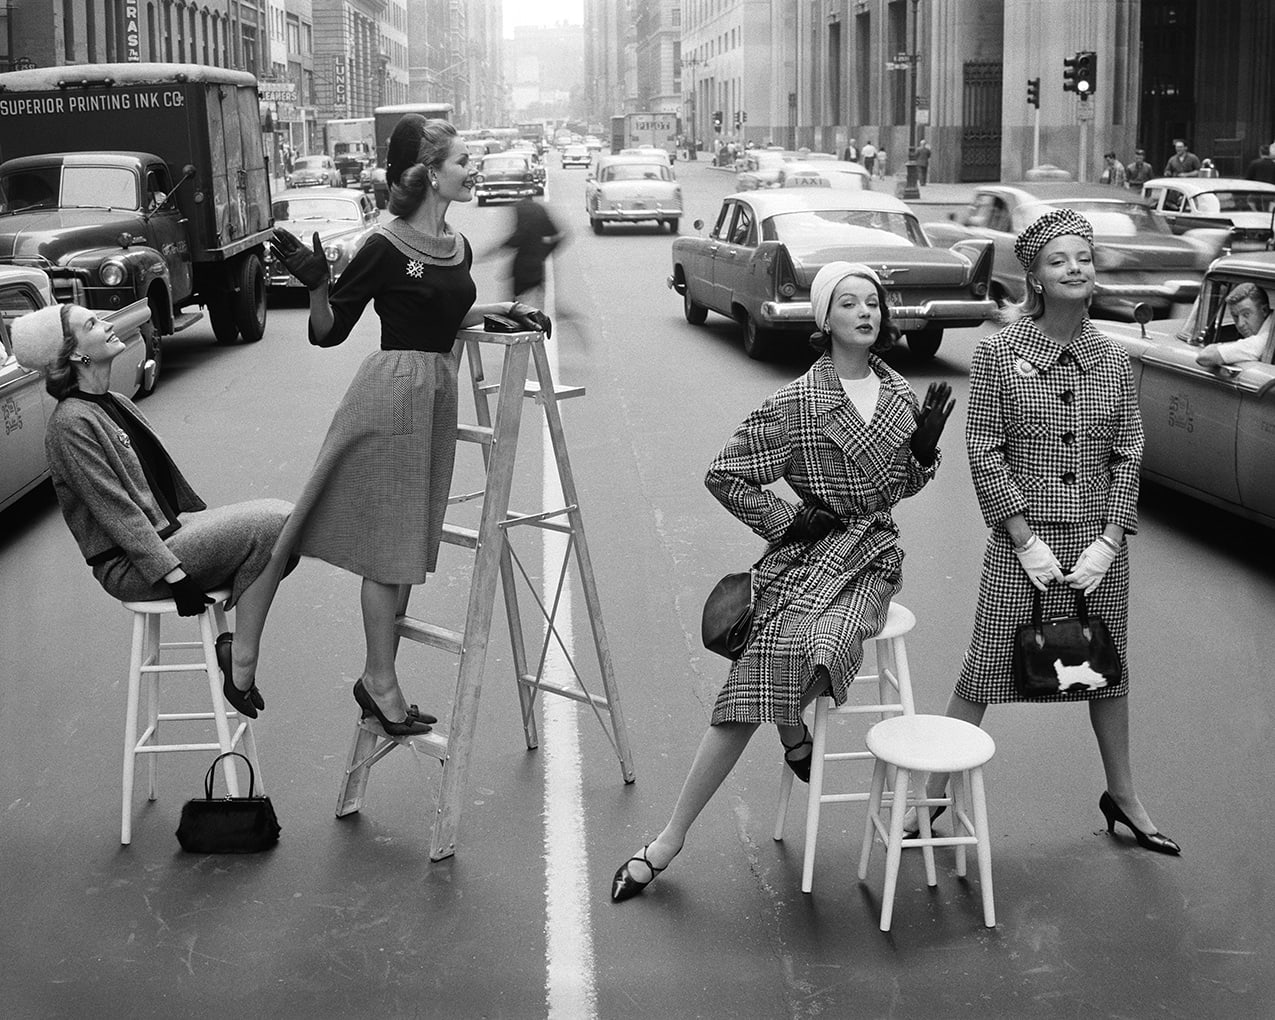 William Helburn, Stopping Traffic (Joanna McCormick, Janet Randy, Betsy Pickering, and Gretchen Harris), Park Avenue South, New York, c. 1958